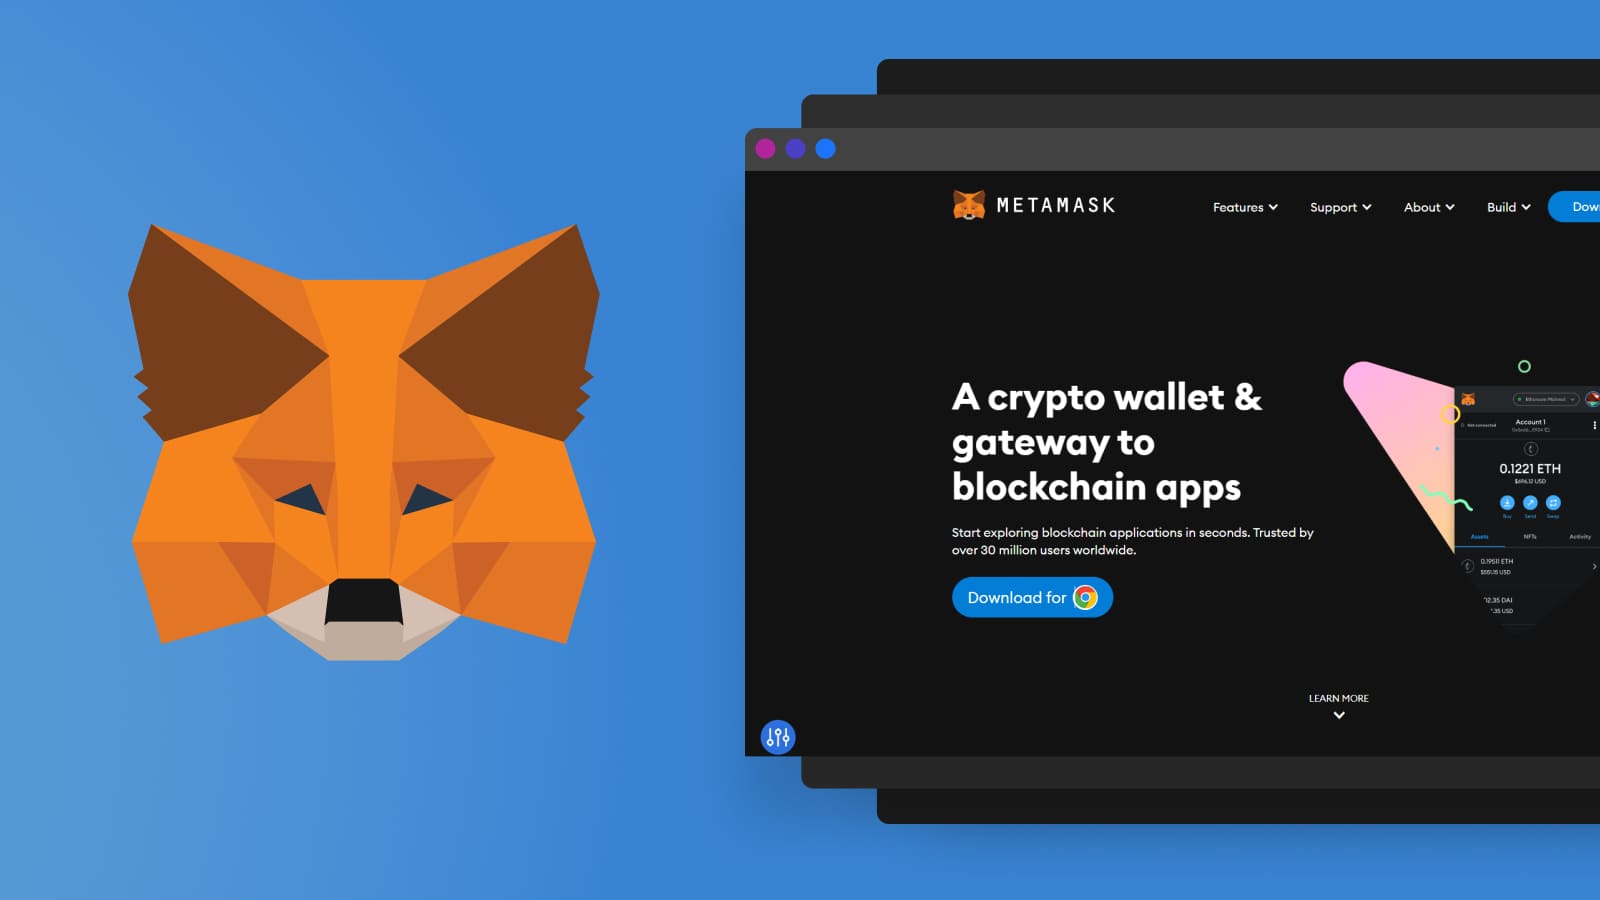 Founded in 2016, MetaMask is a popular, user-friendly Ethereum wallet.